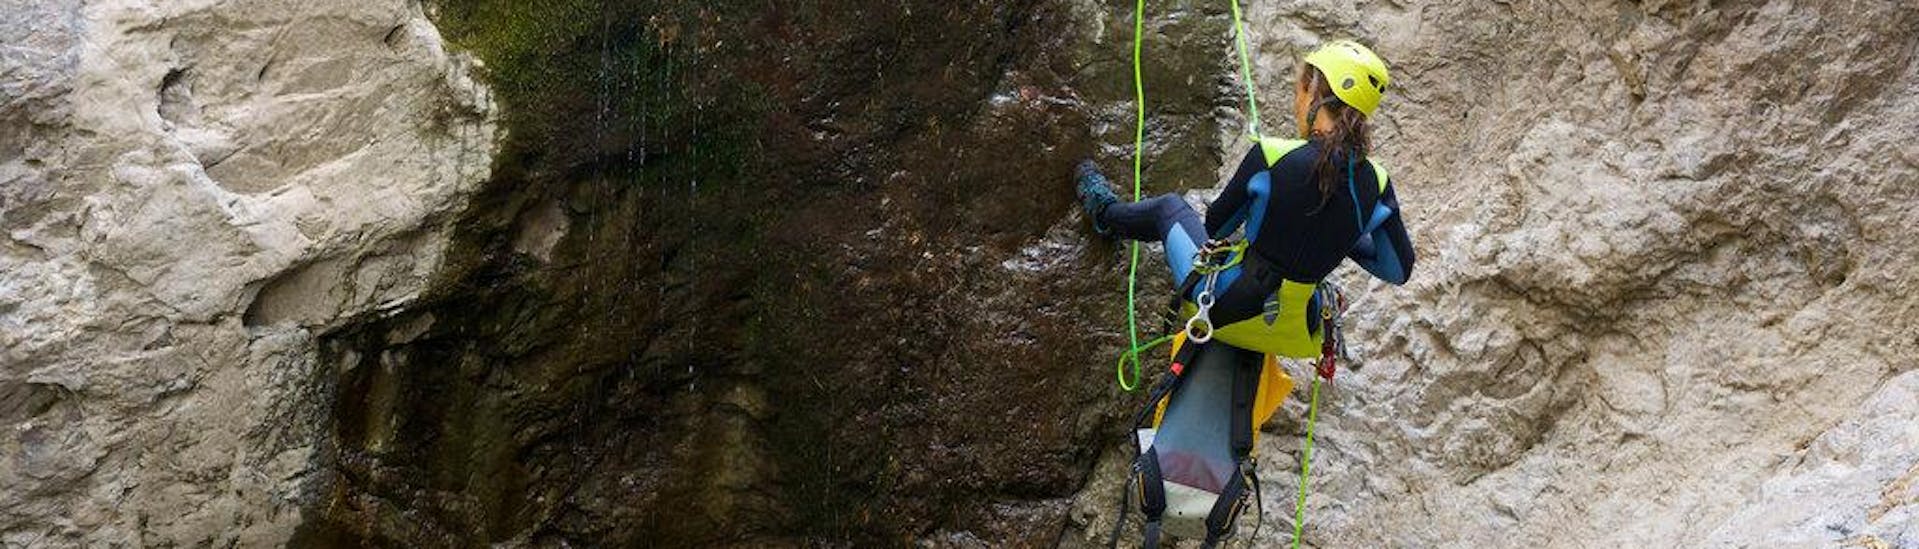 A woman descending a canyon during a half-day canyoning activity.